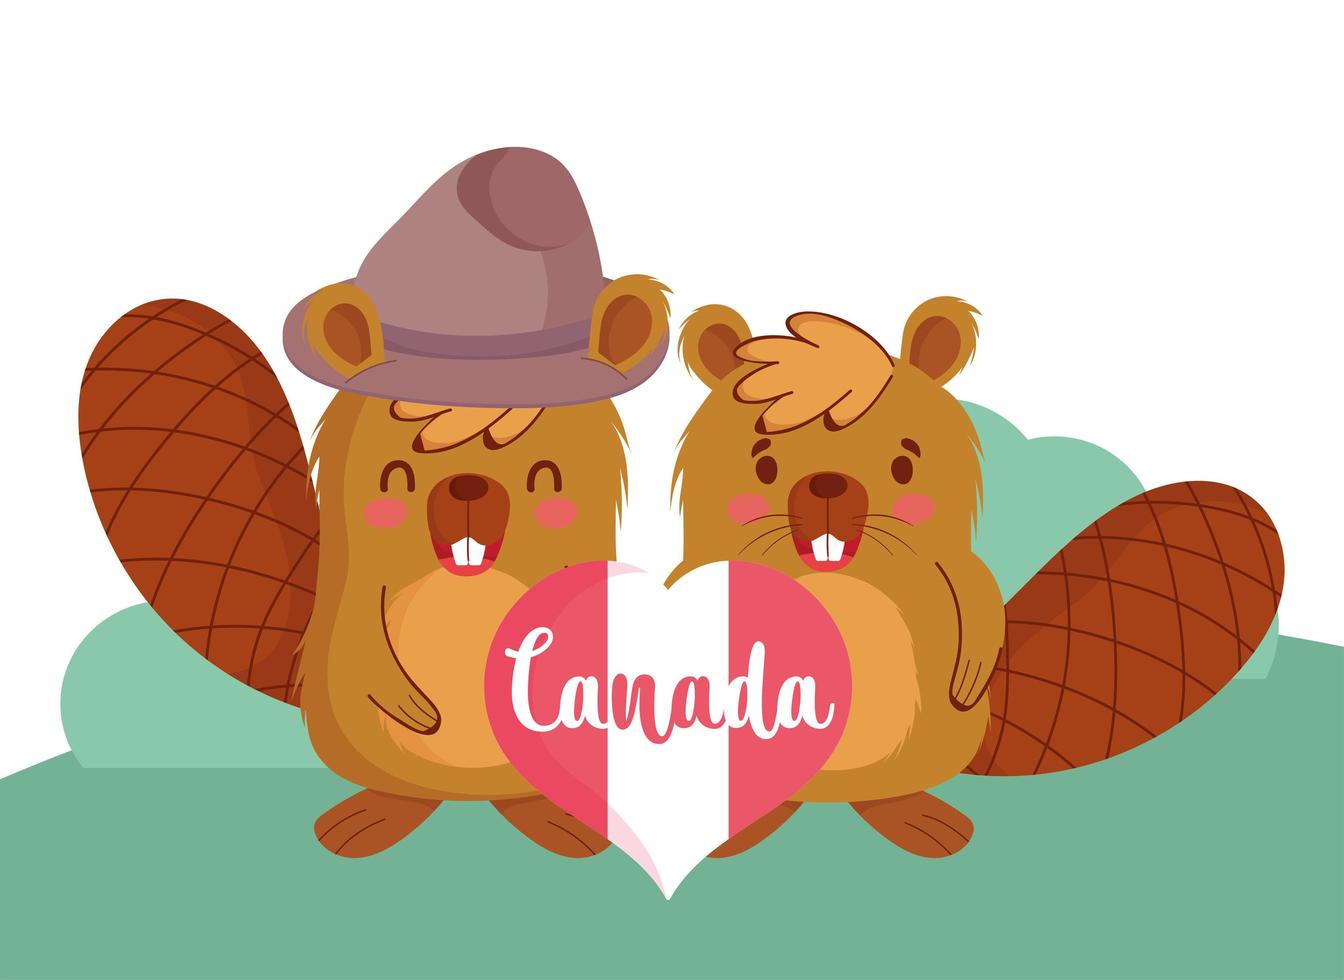 Beavers with canadian heart vector design